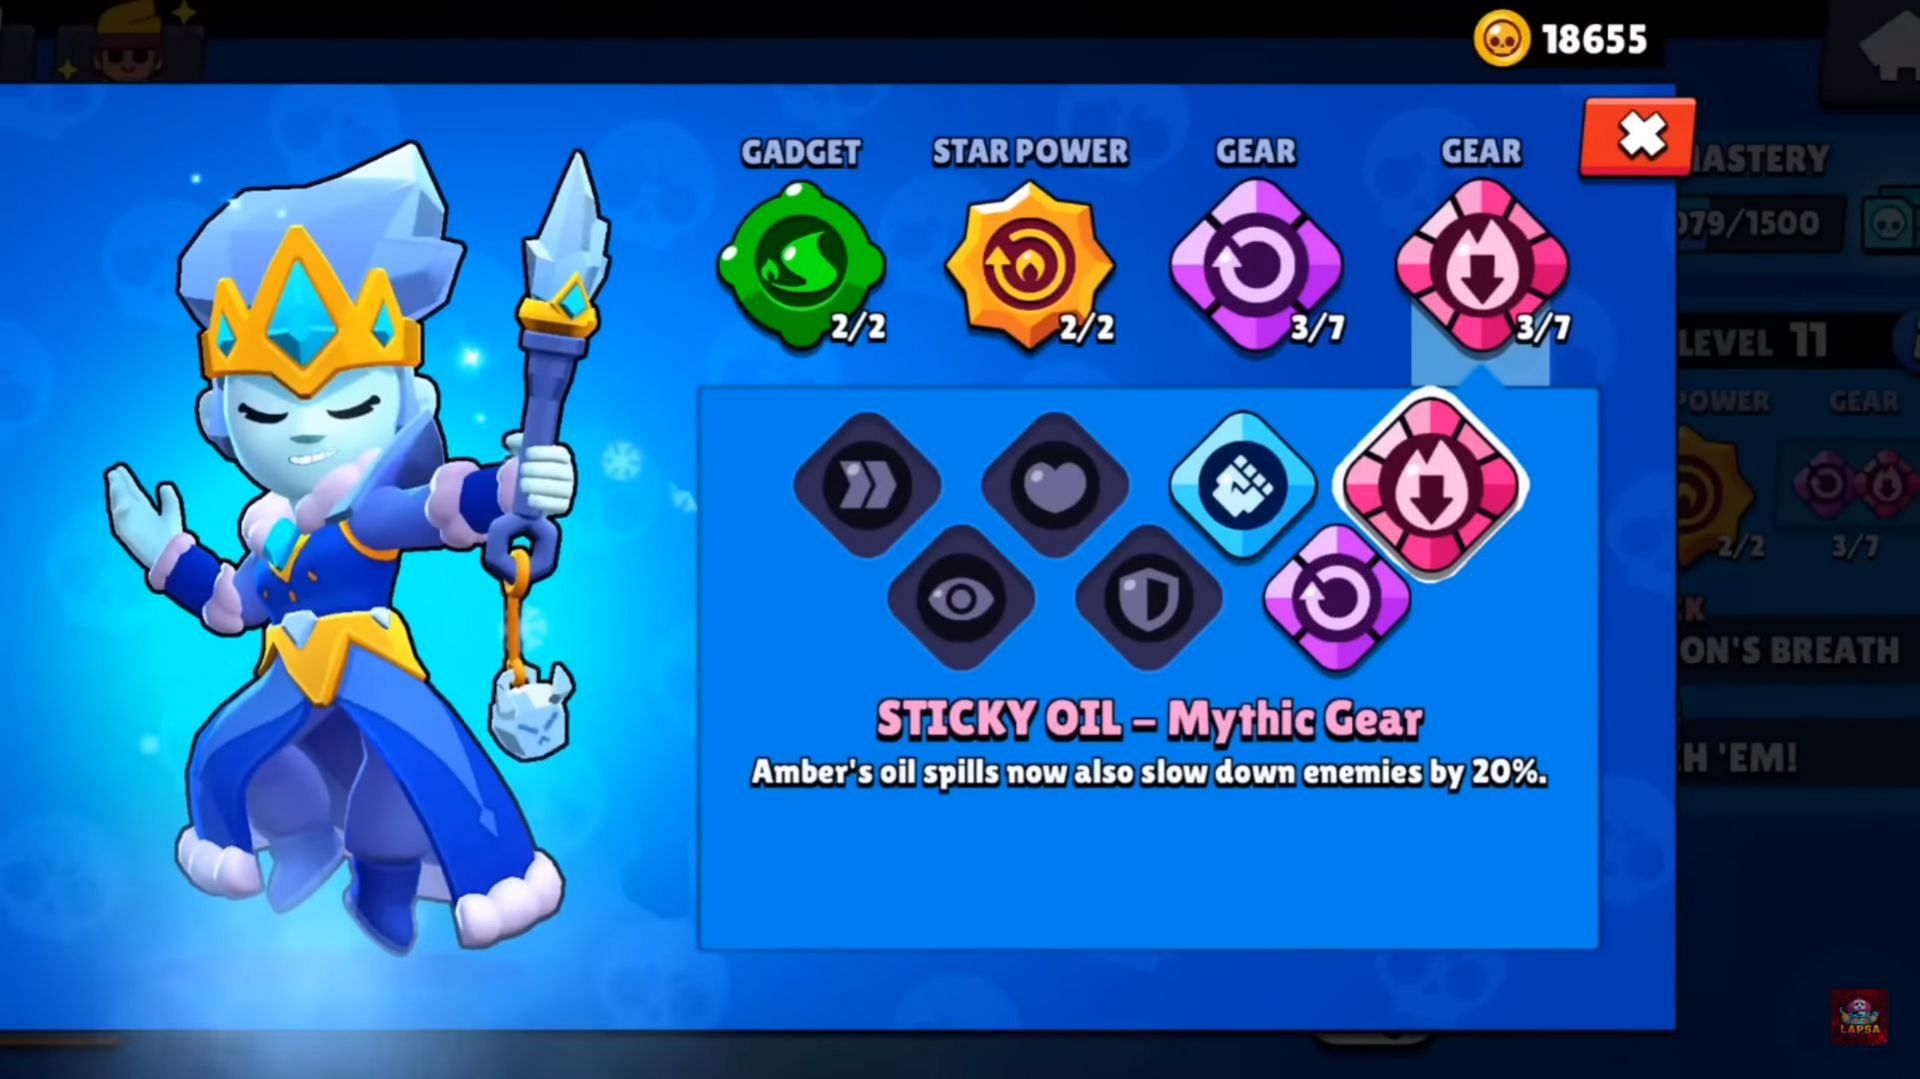 Sticky Oil Mythic Gear (Image via Supercell)